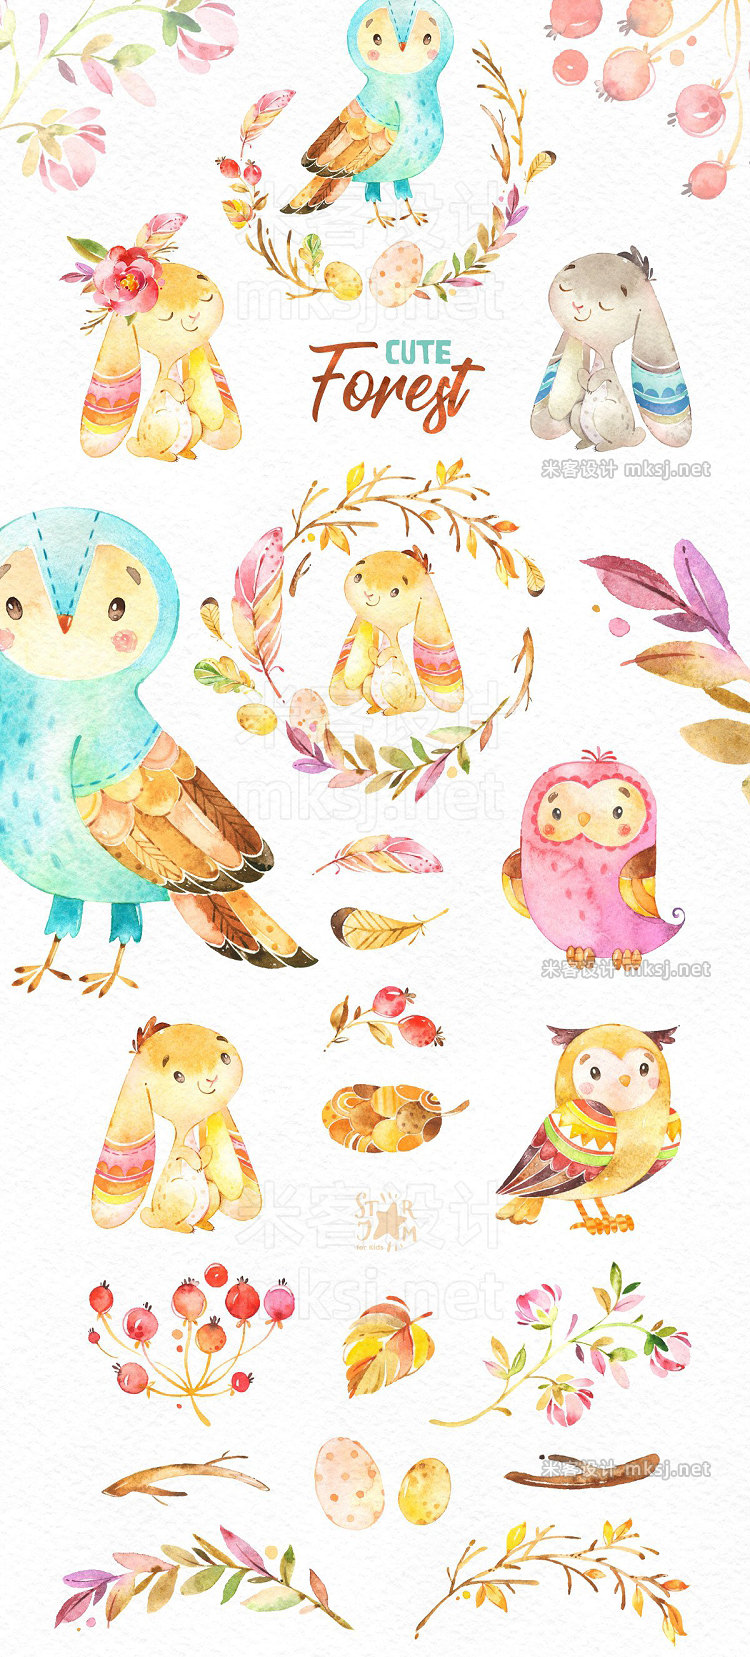 png素材 Cute Forest Collection of animals